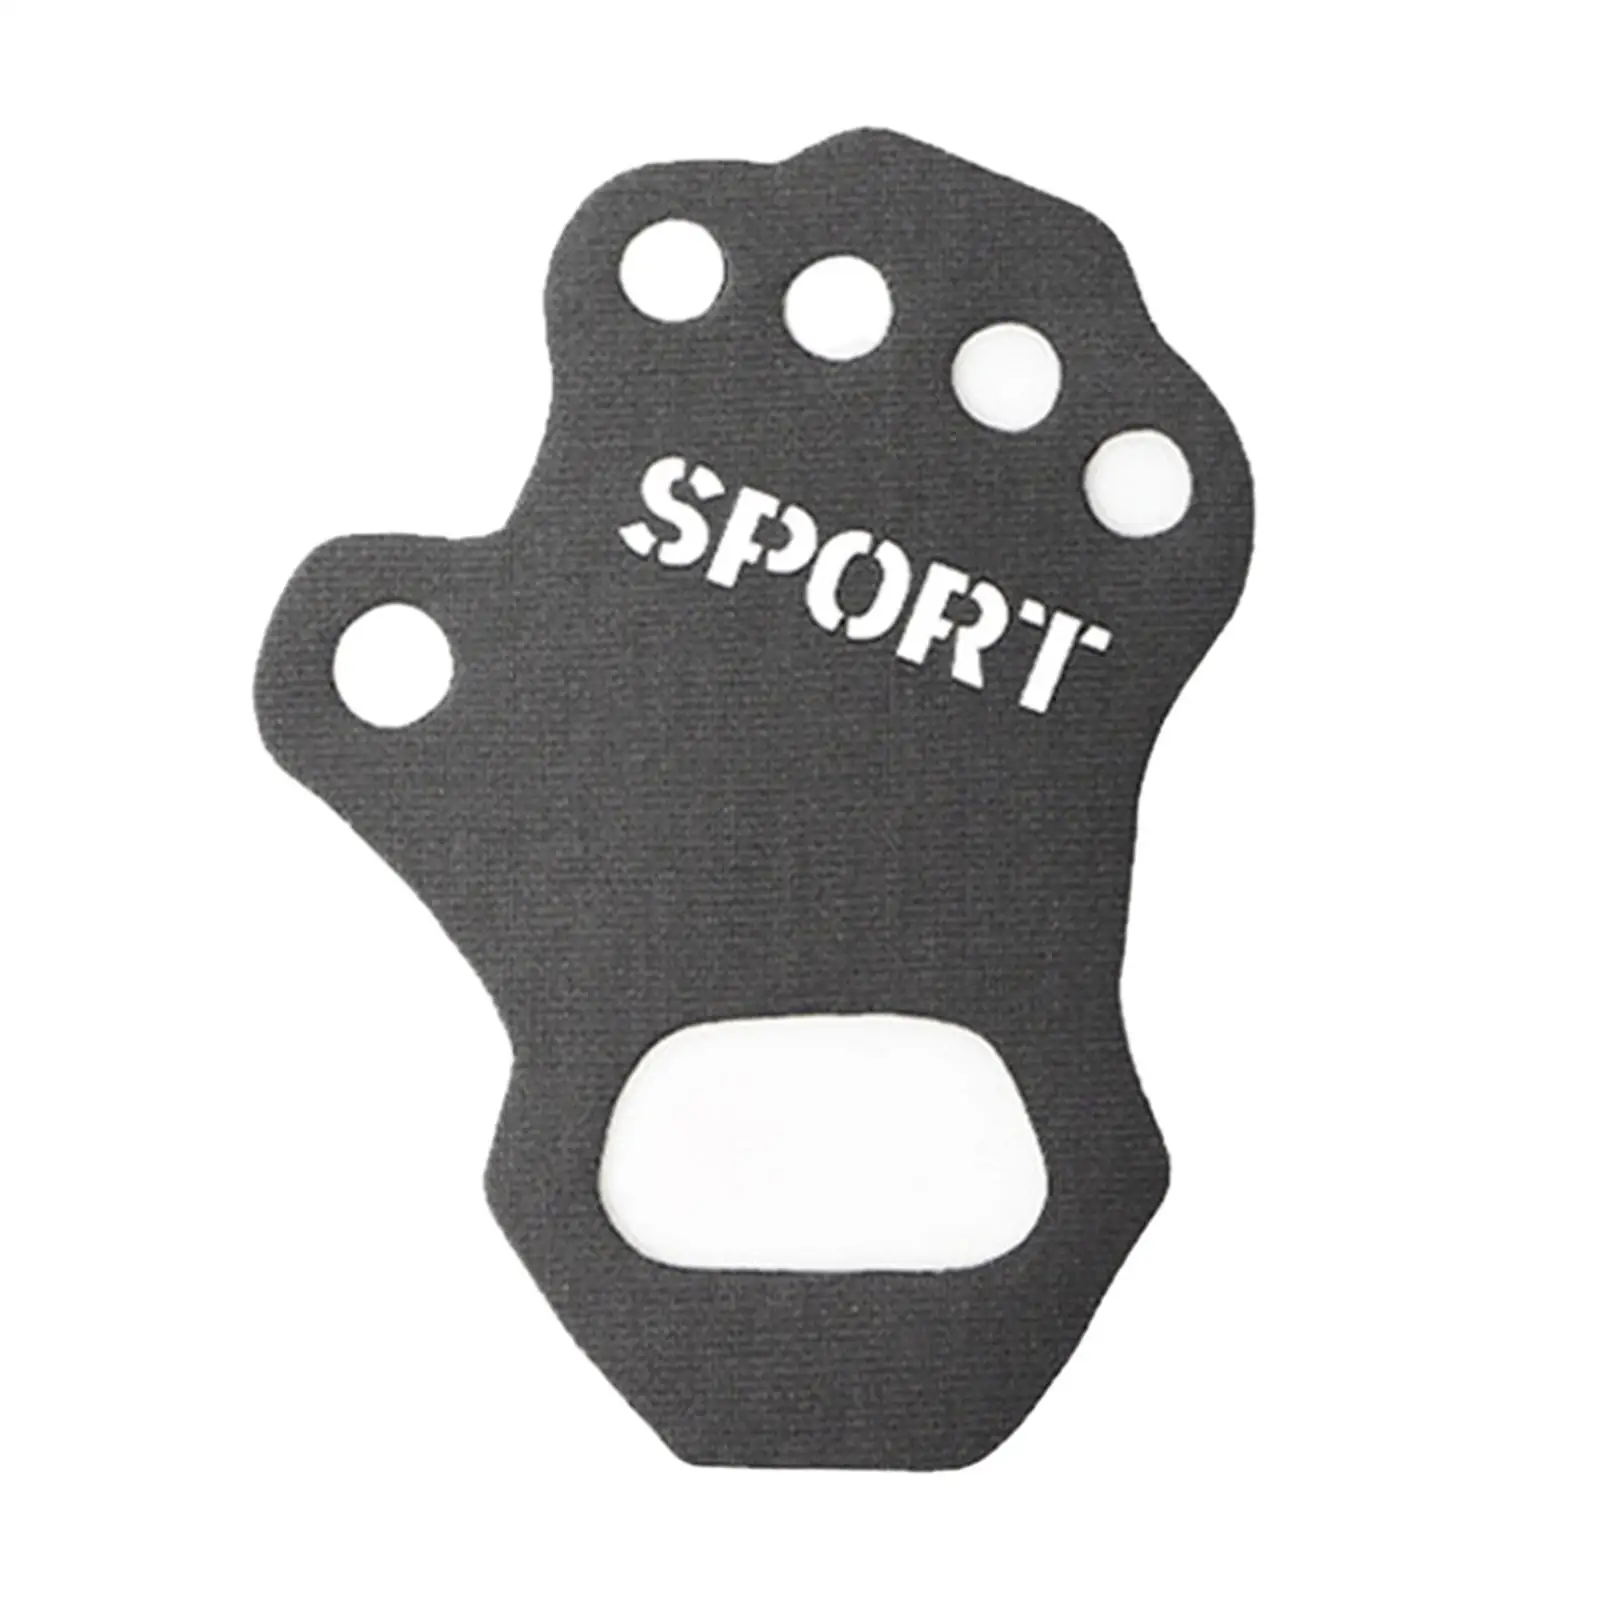 Workout Glove Anti Wear Durable Full Palm Protection Exercise Grip Pad for Riding Sports Calisthenics Gym Cycling Weightlifting